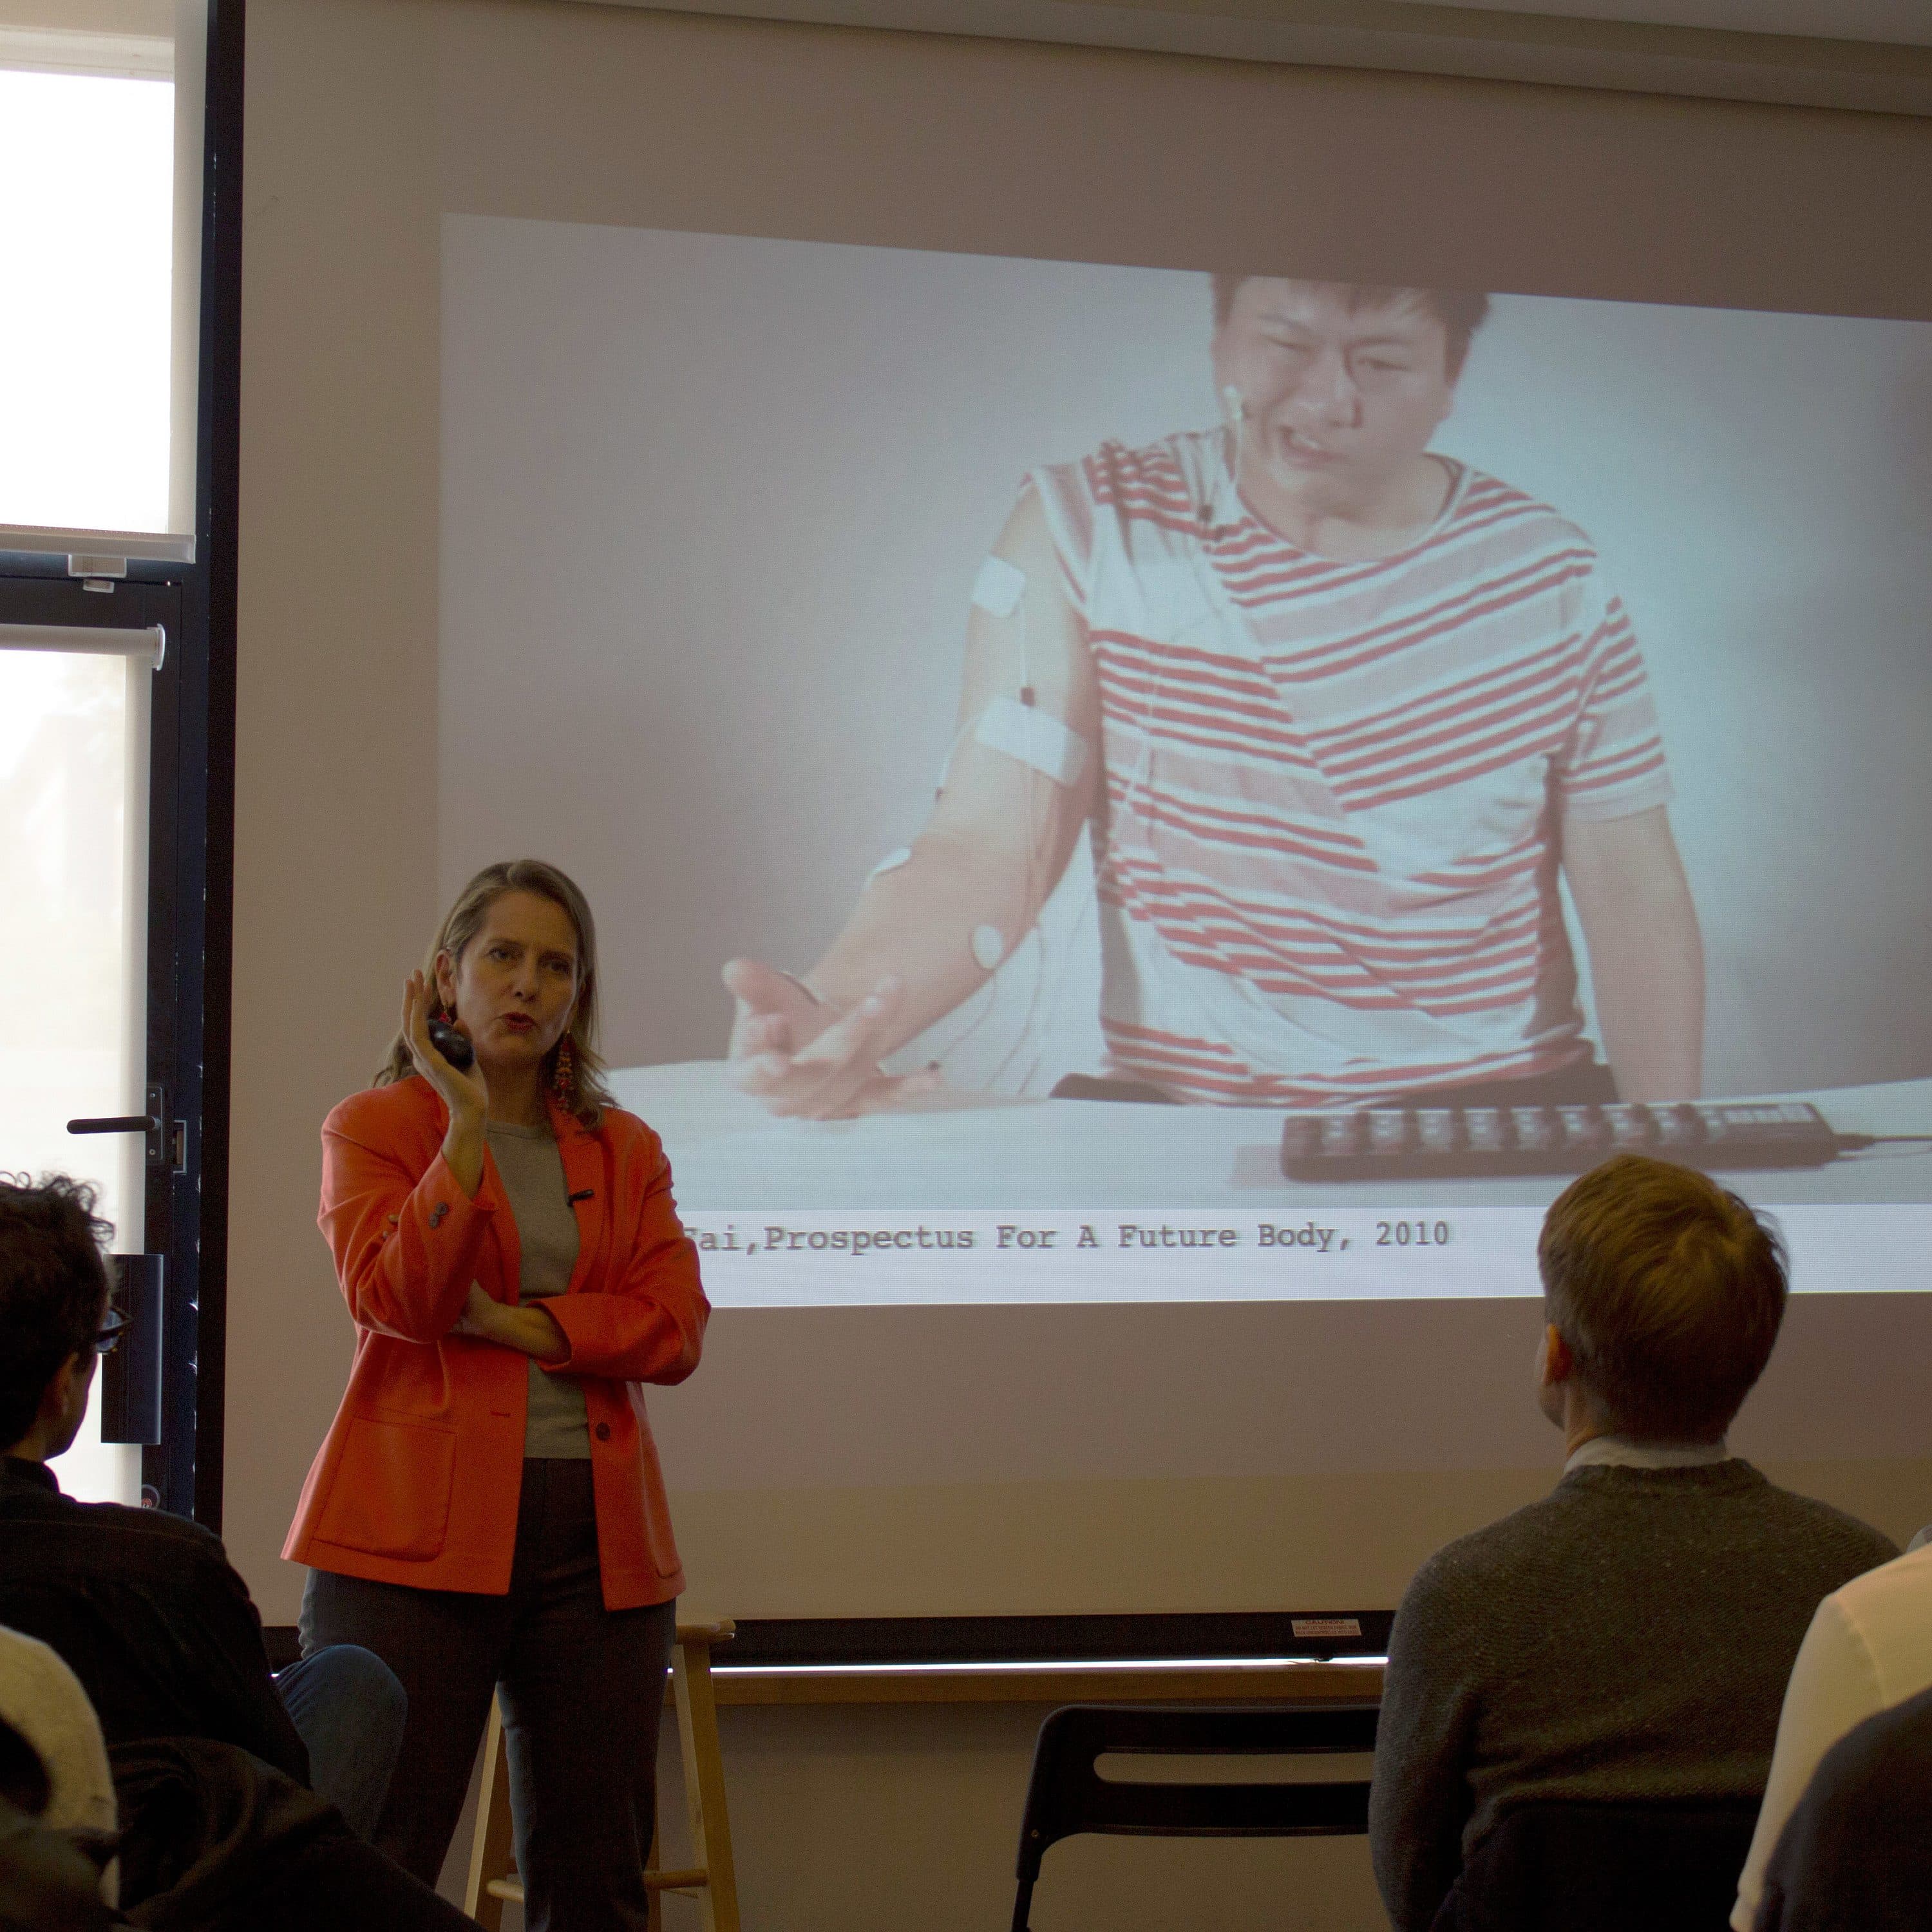 A woman standing in front of a projected screen is speaking to an audience. The screen displays an image of a person with electrodes on their arm, interacting with a keyboard. The indoor setting has a mix of natural and artificial lighting, with an open door on the left.